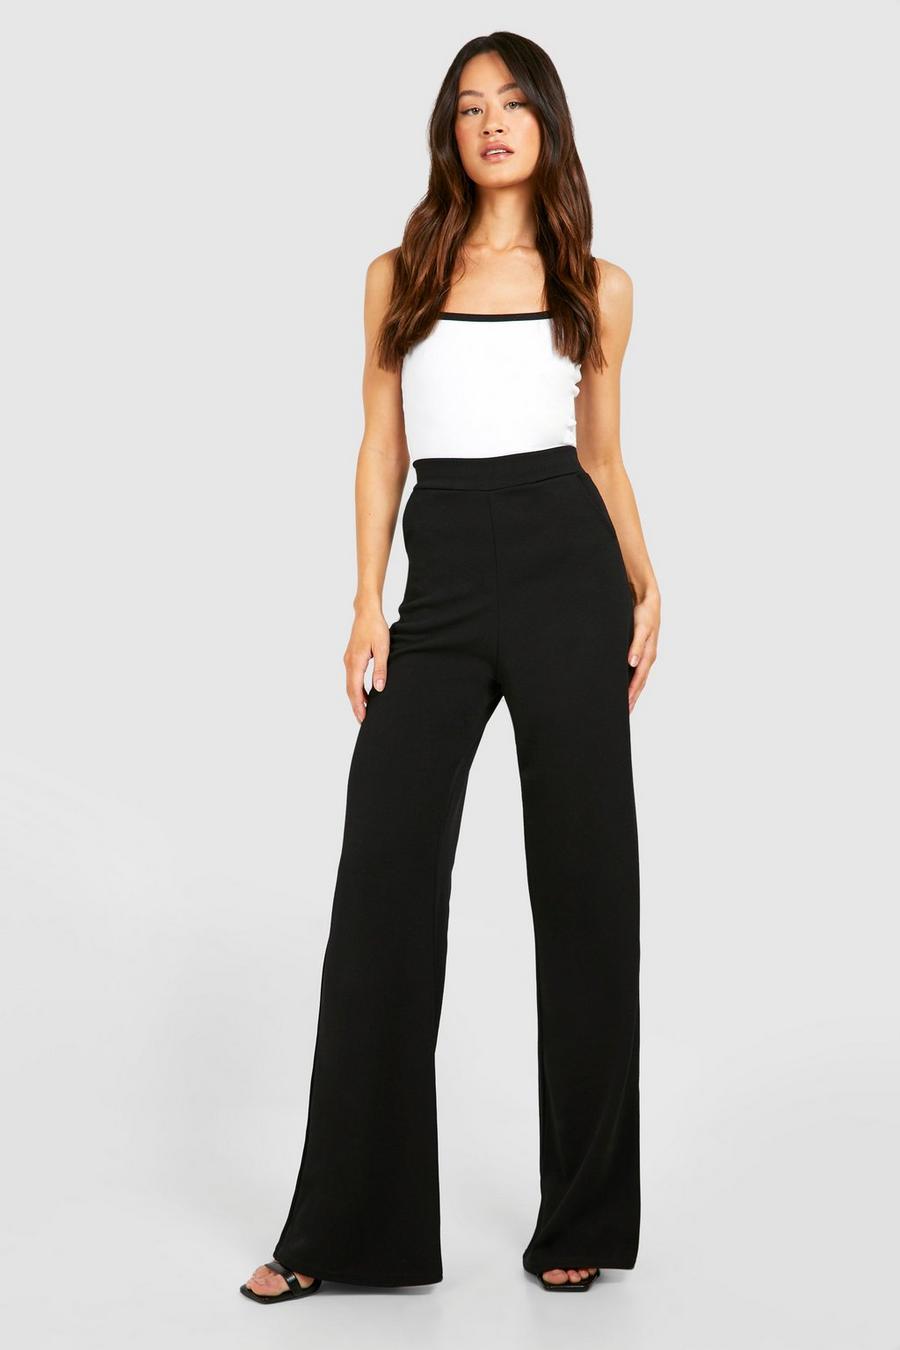 Black Tall High Waisted Pants image number 1